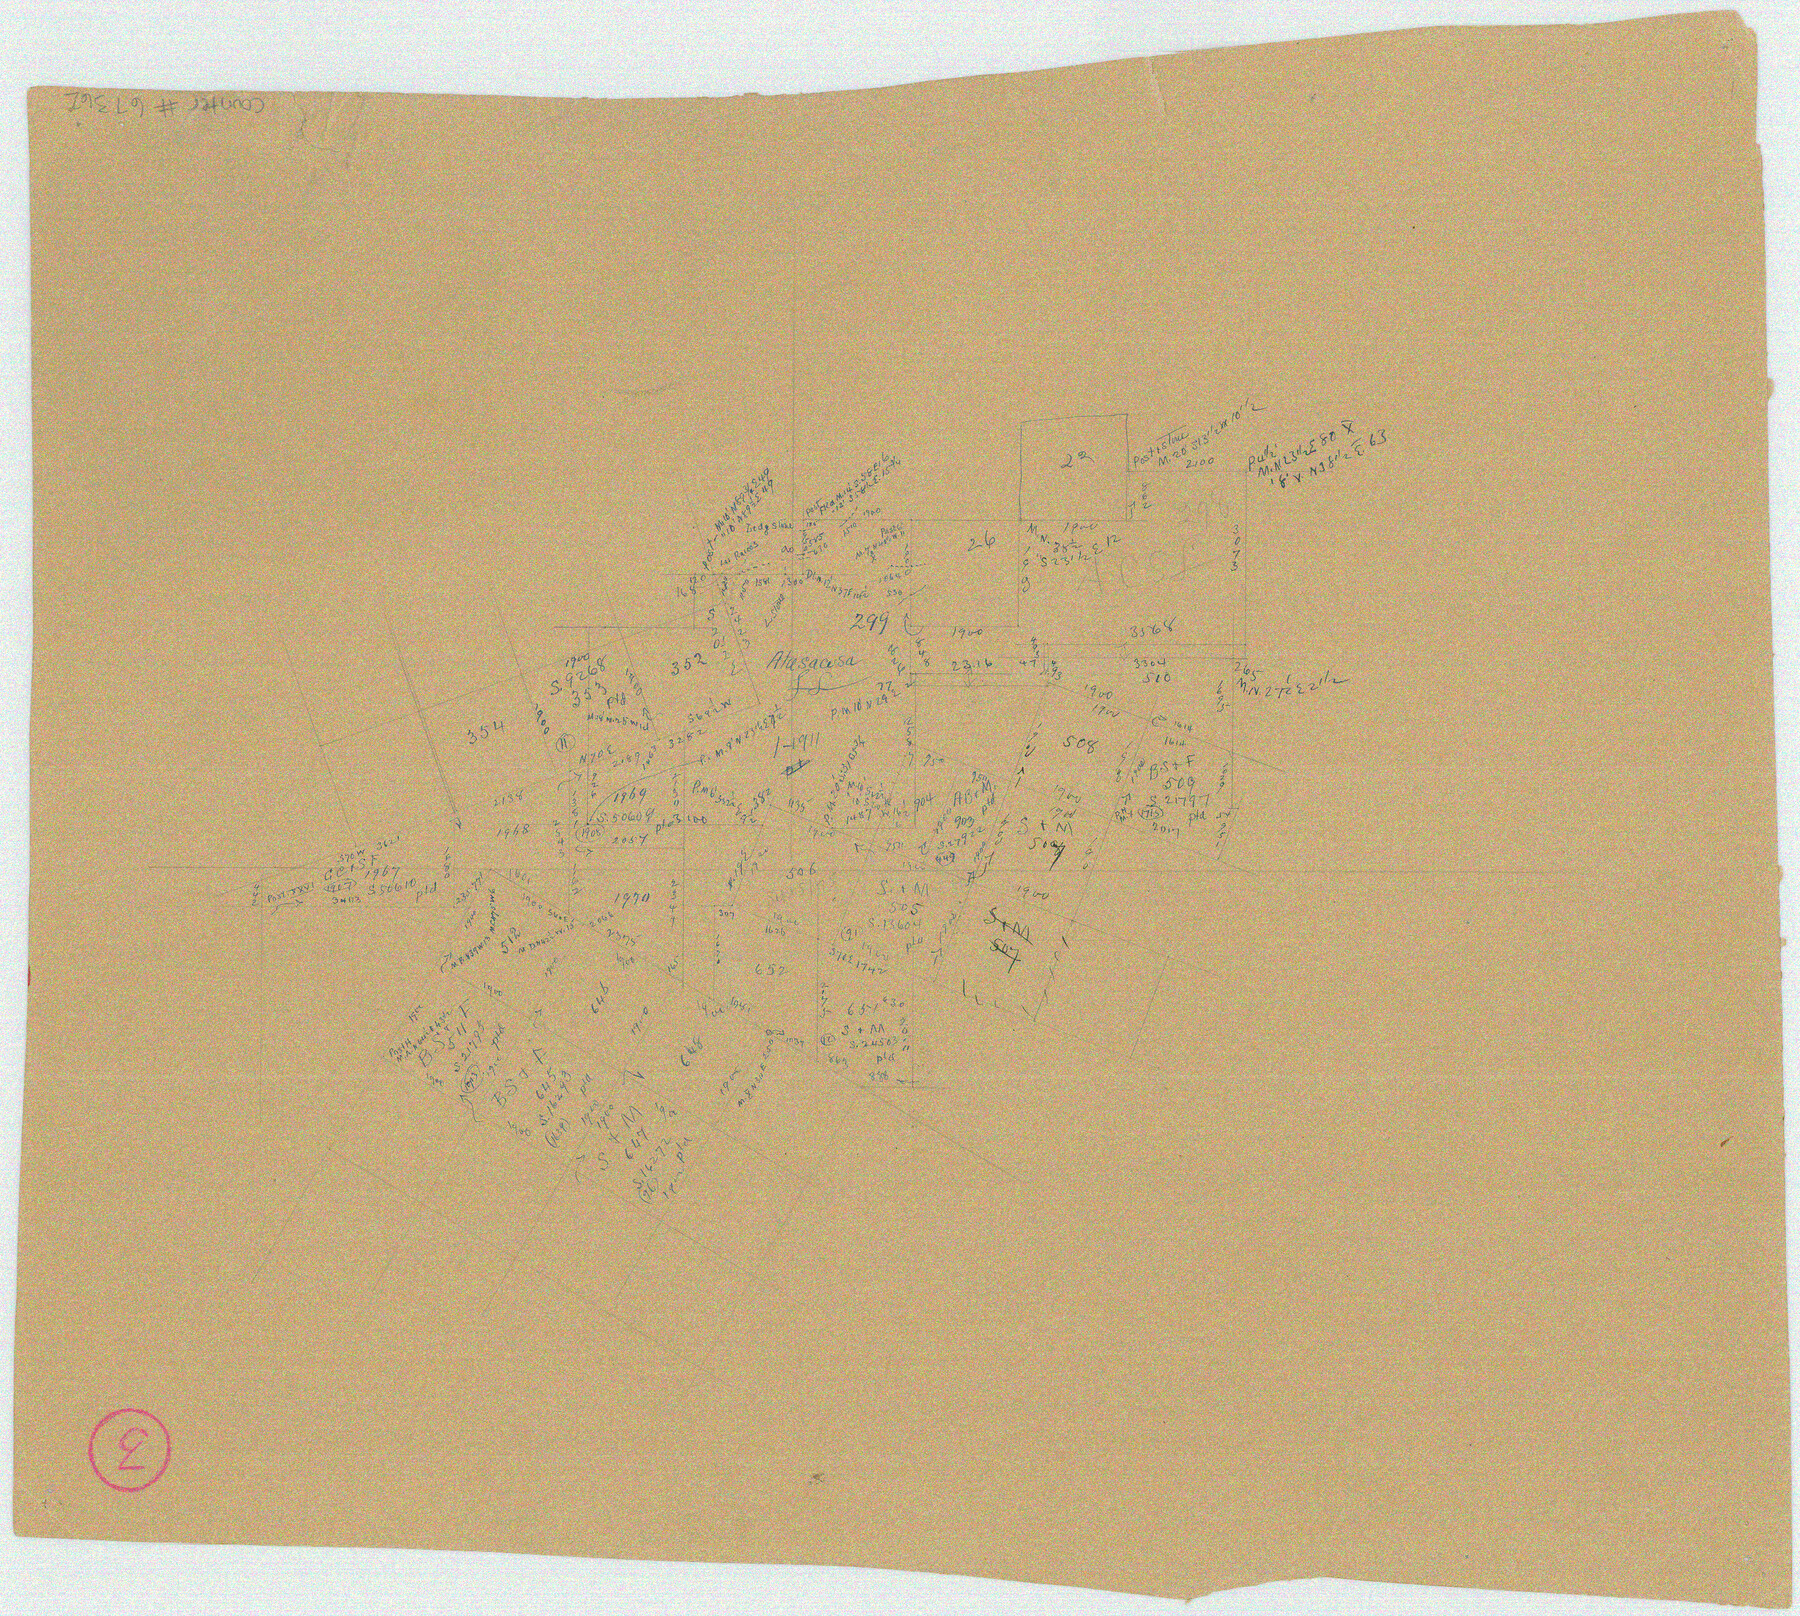 67362, La Salle County Working Sketch 53, General Map Collection